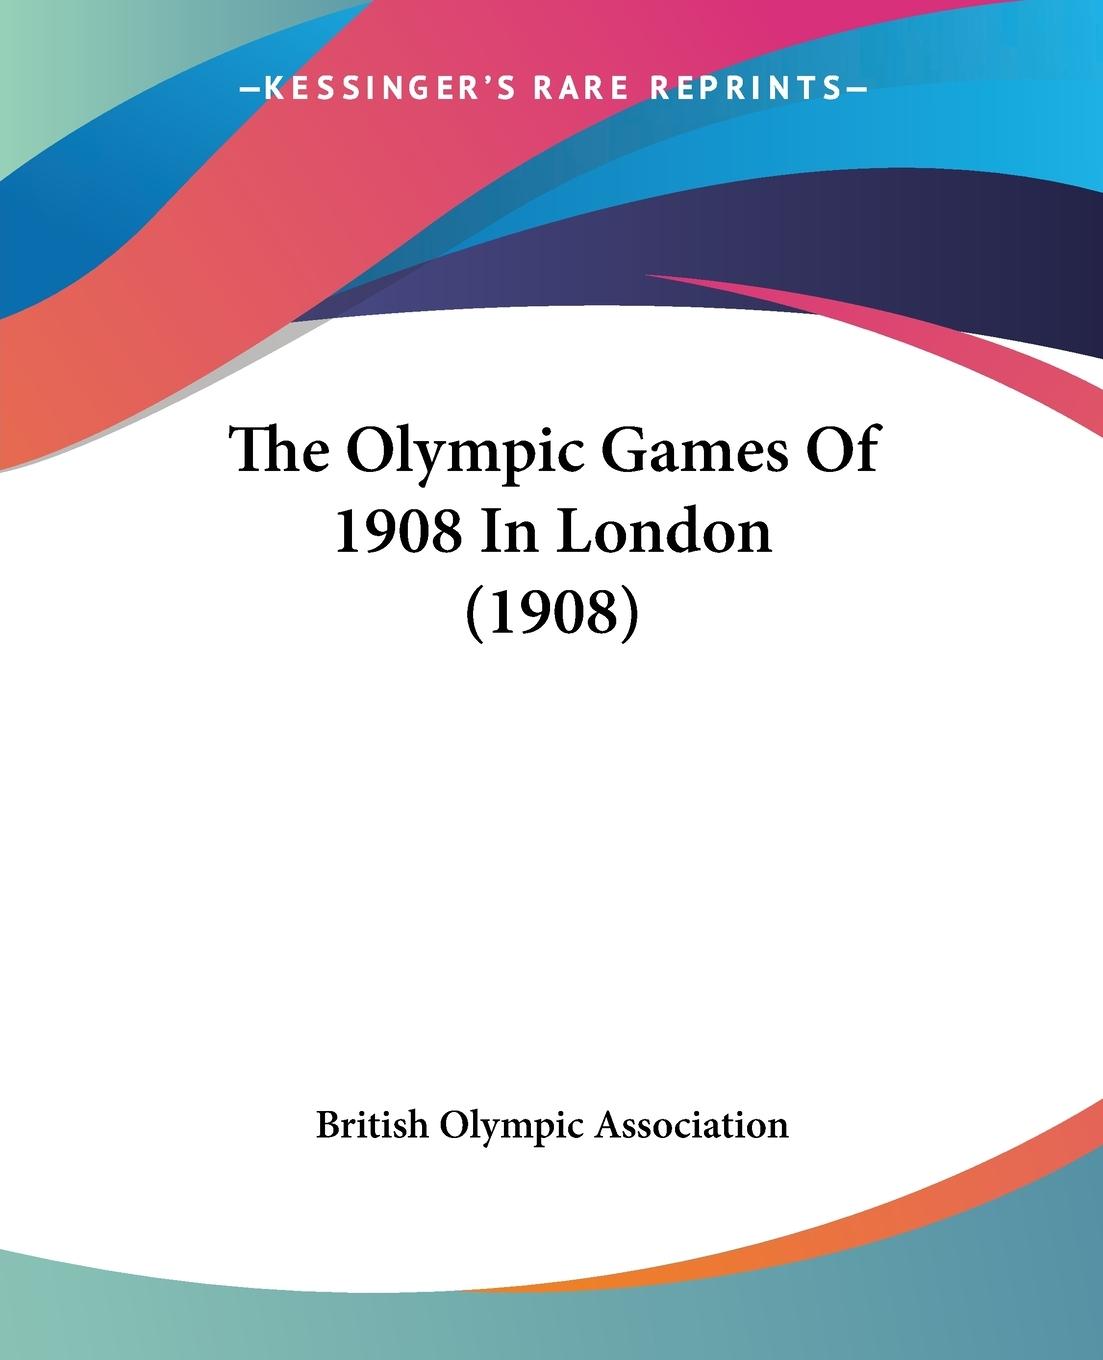 The Olympic Games Of 1908 In London (1908) - British Olympic Association